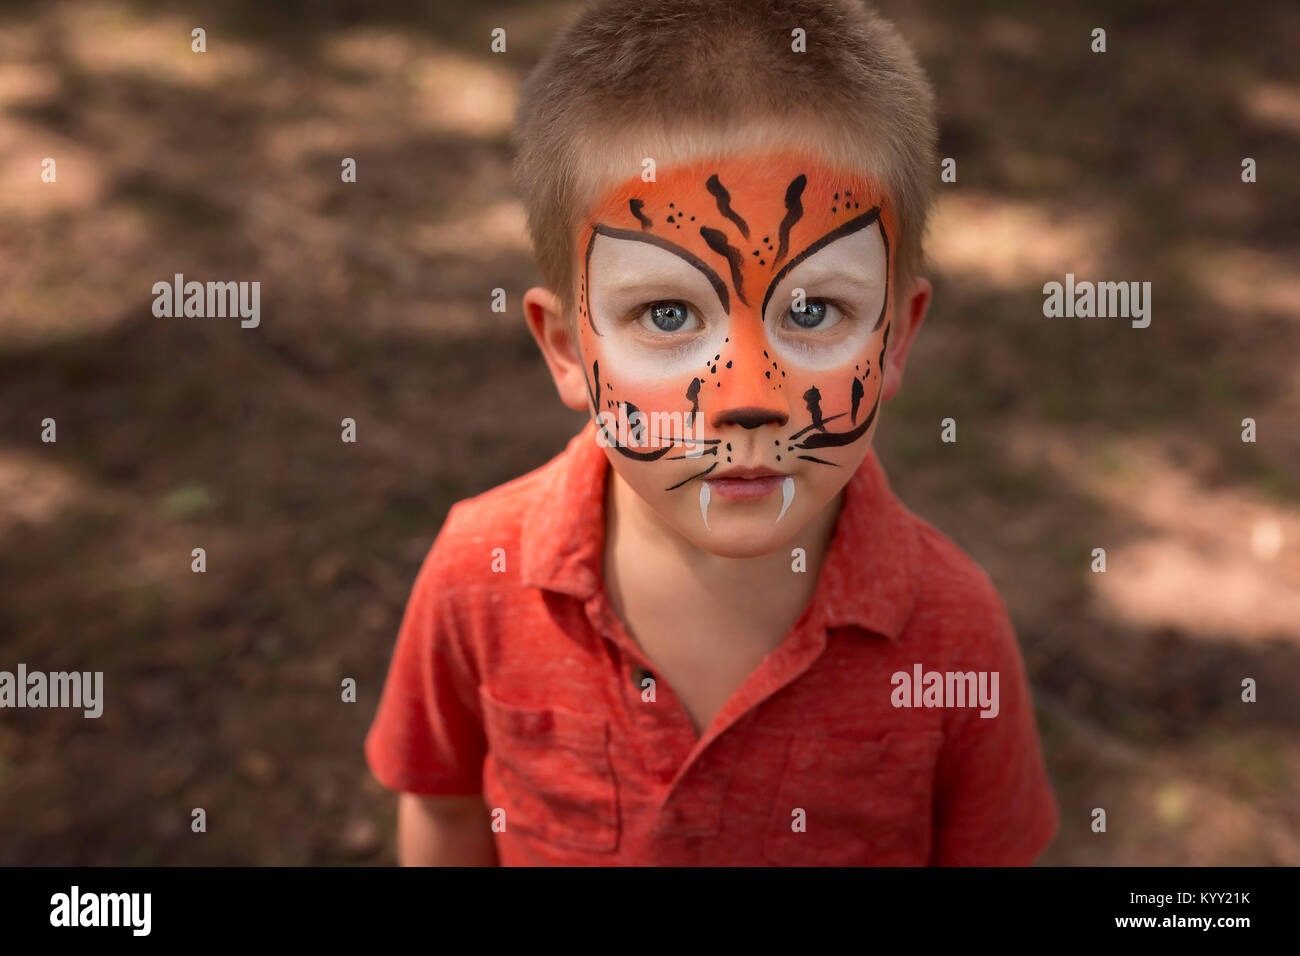 High angle portrait of confident boy with face paint Stock Photo